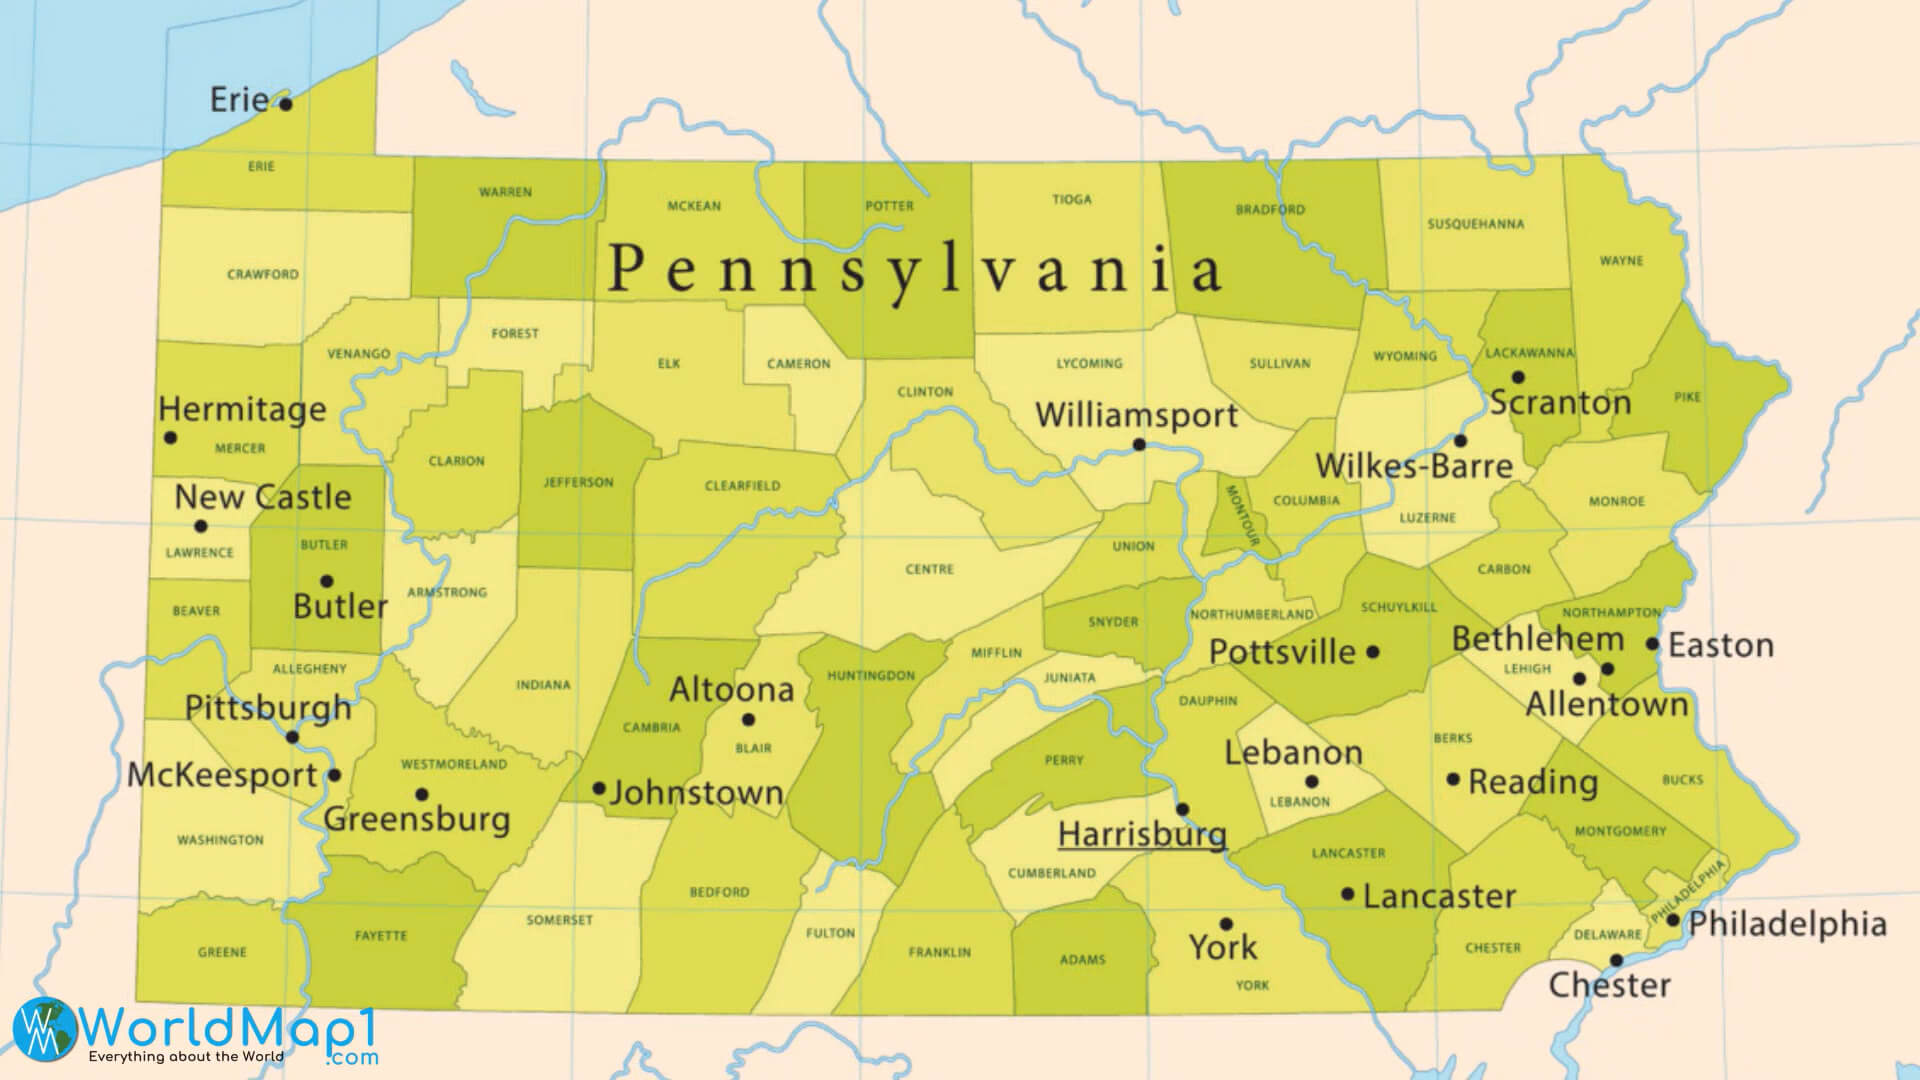 Pennsylvania counties and major cities map